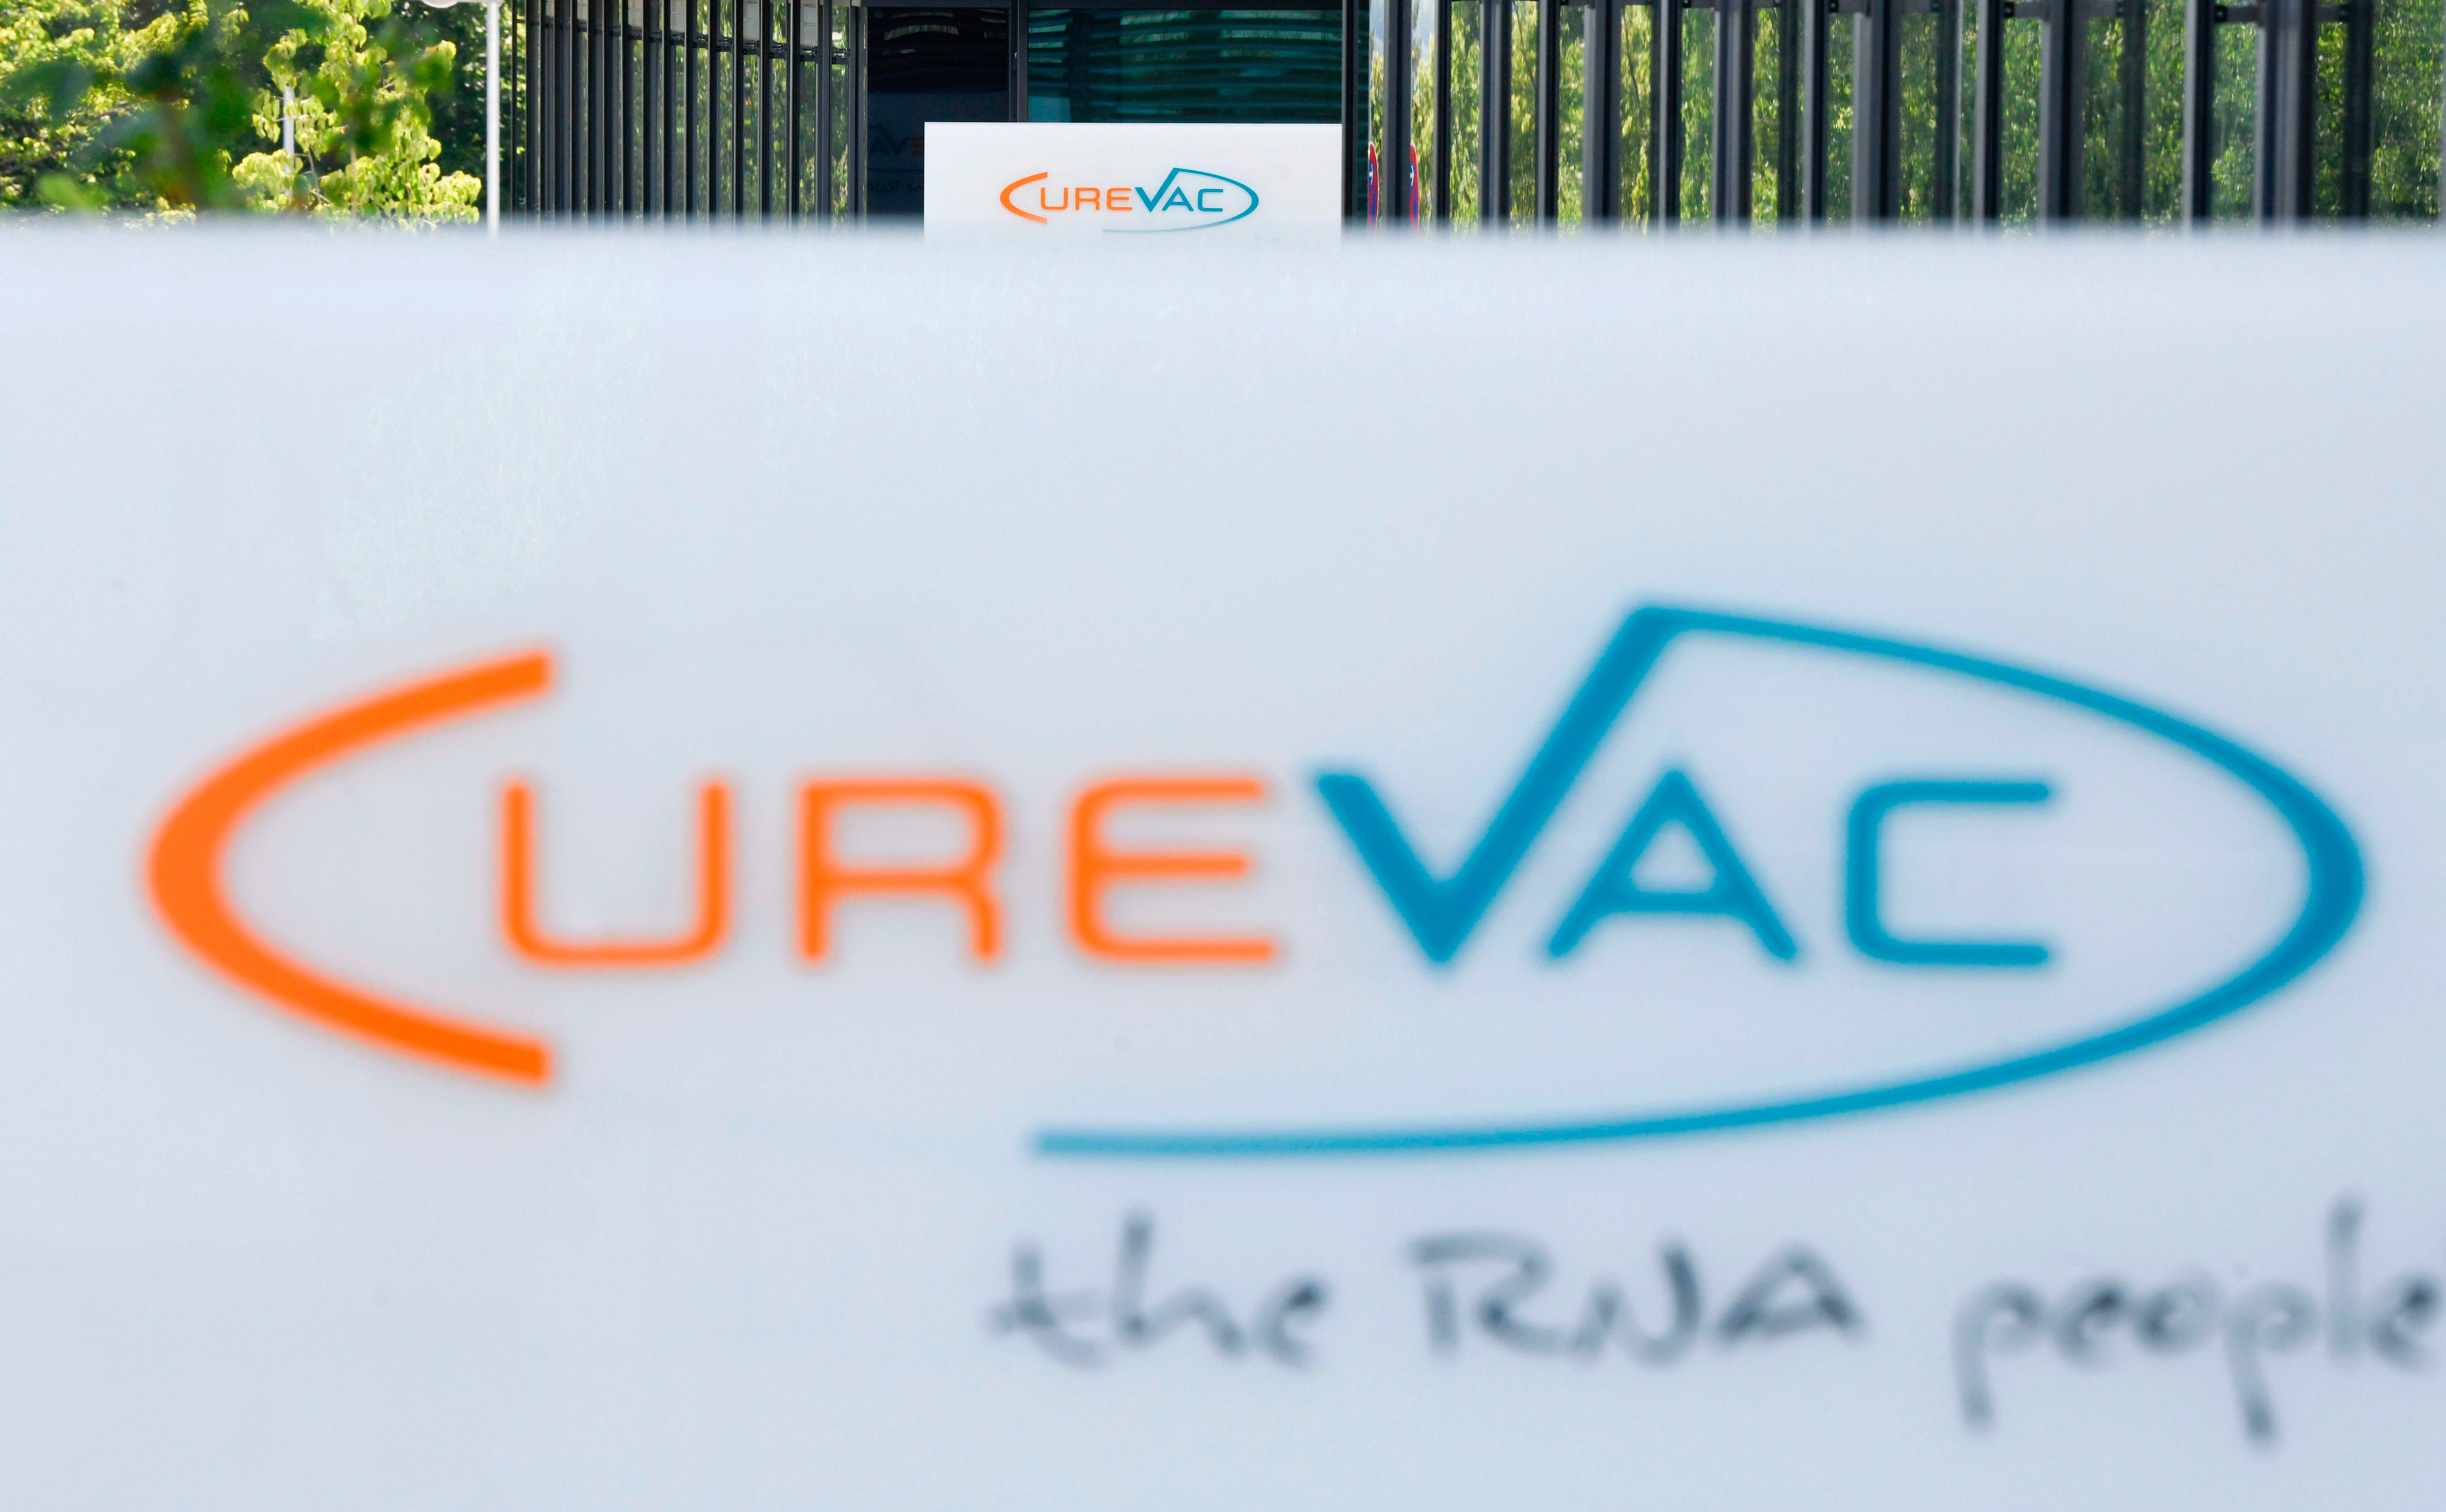 Logo of the biopharmaceutical company CureVac. Credit: AFP Photo